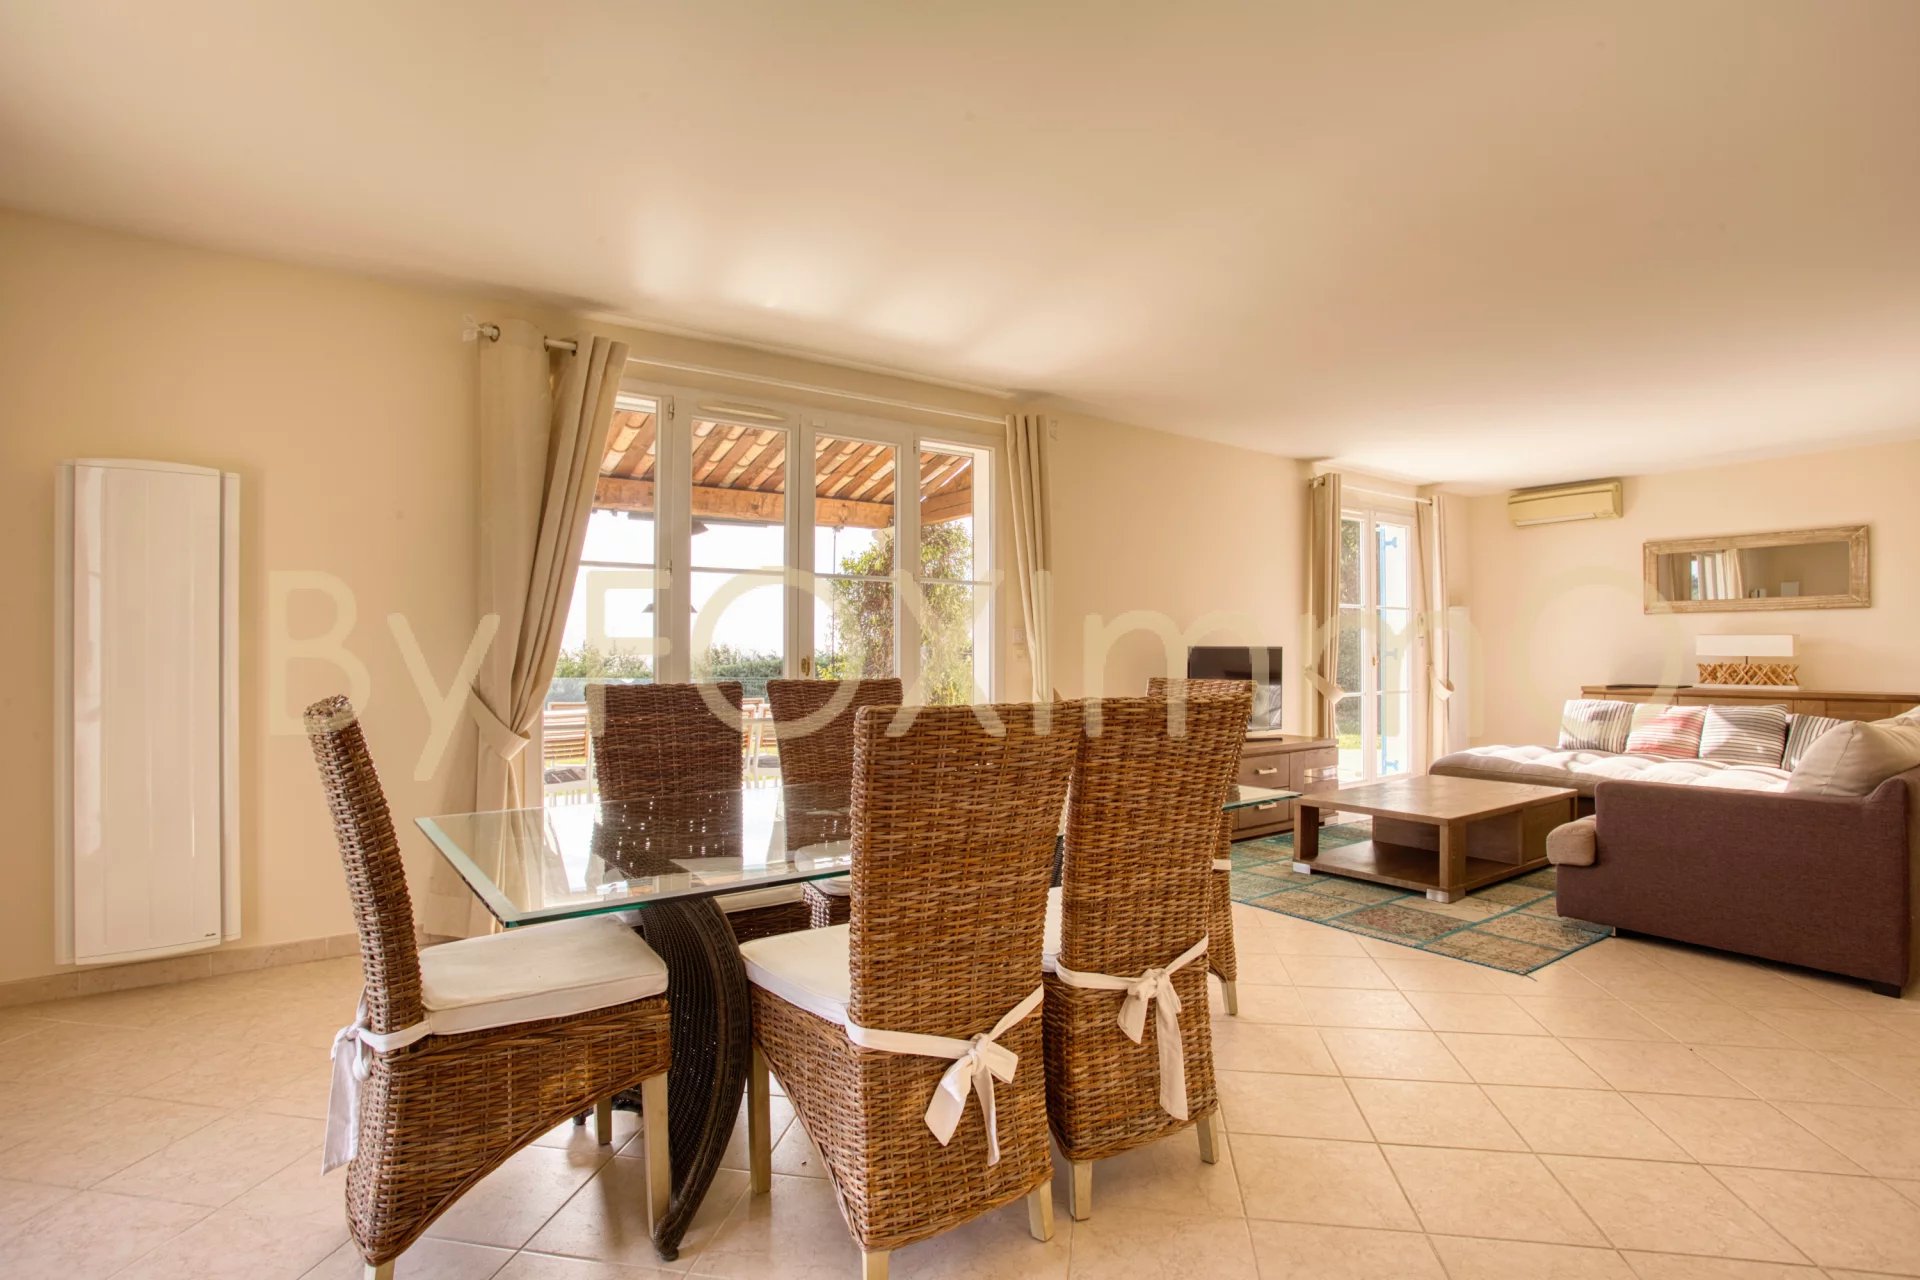 On the French Riviera, villa with panoramic sea view, 3/4 bedrooms, flat garden, pool, jacuzzi, garage and parking